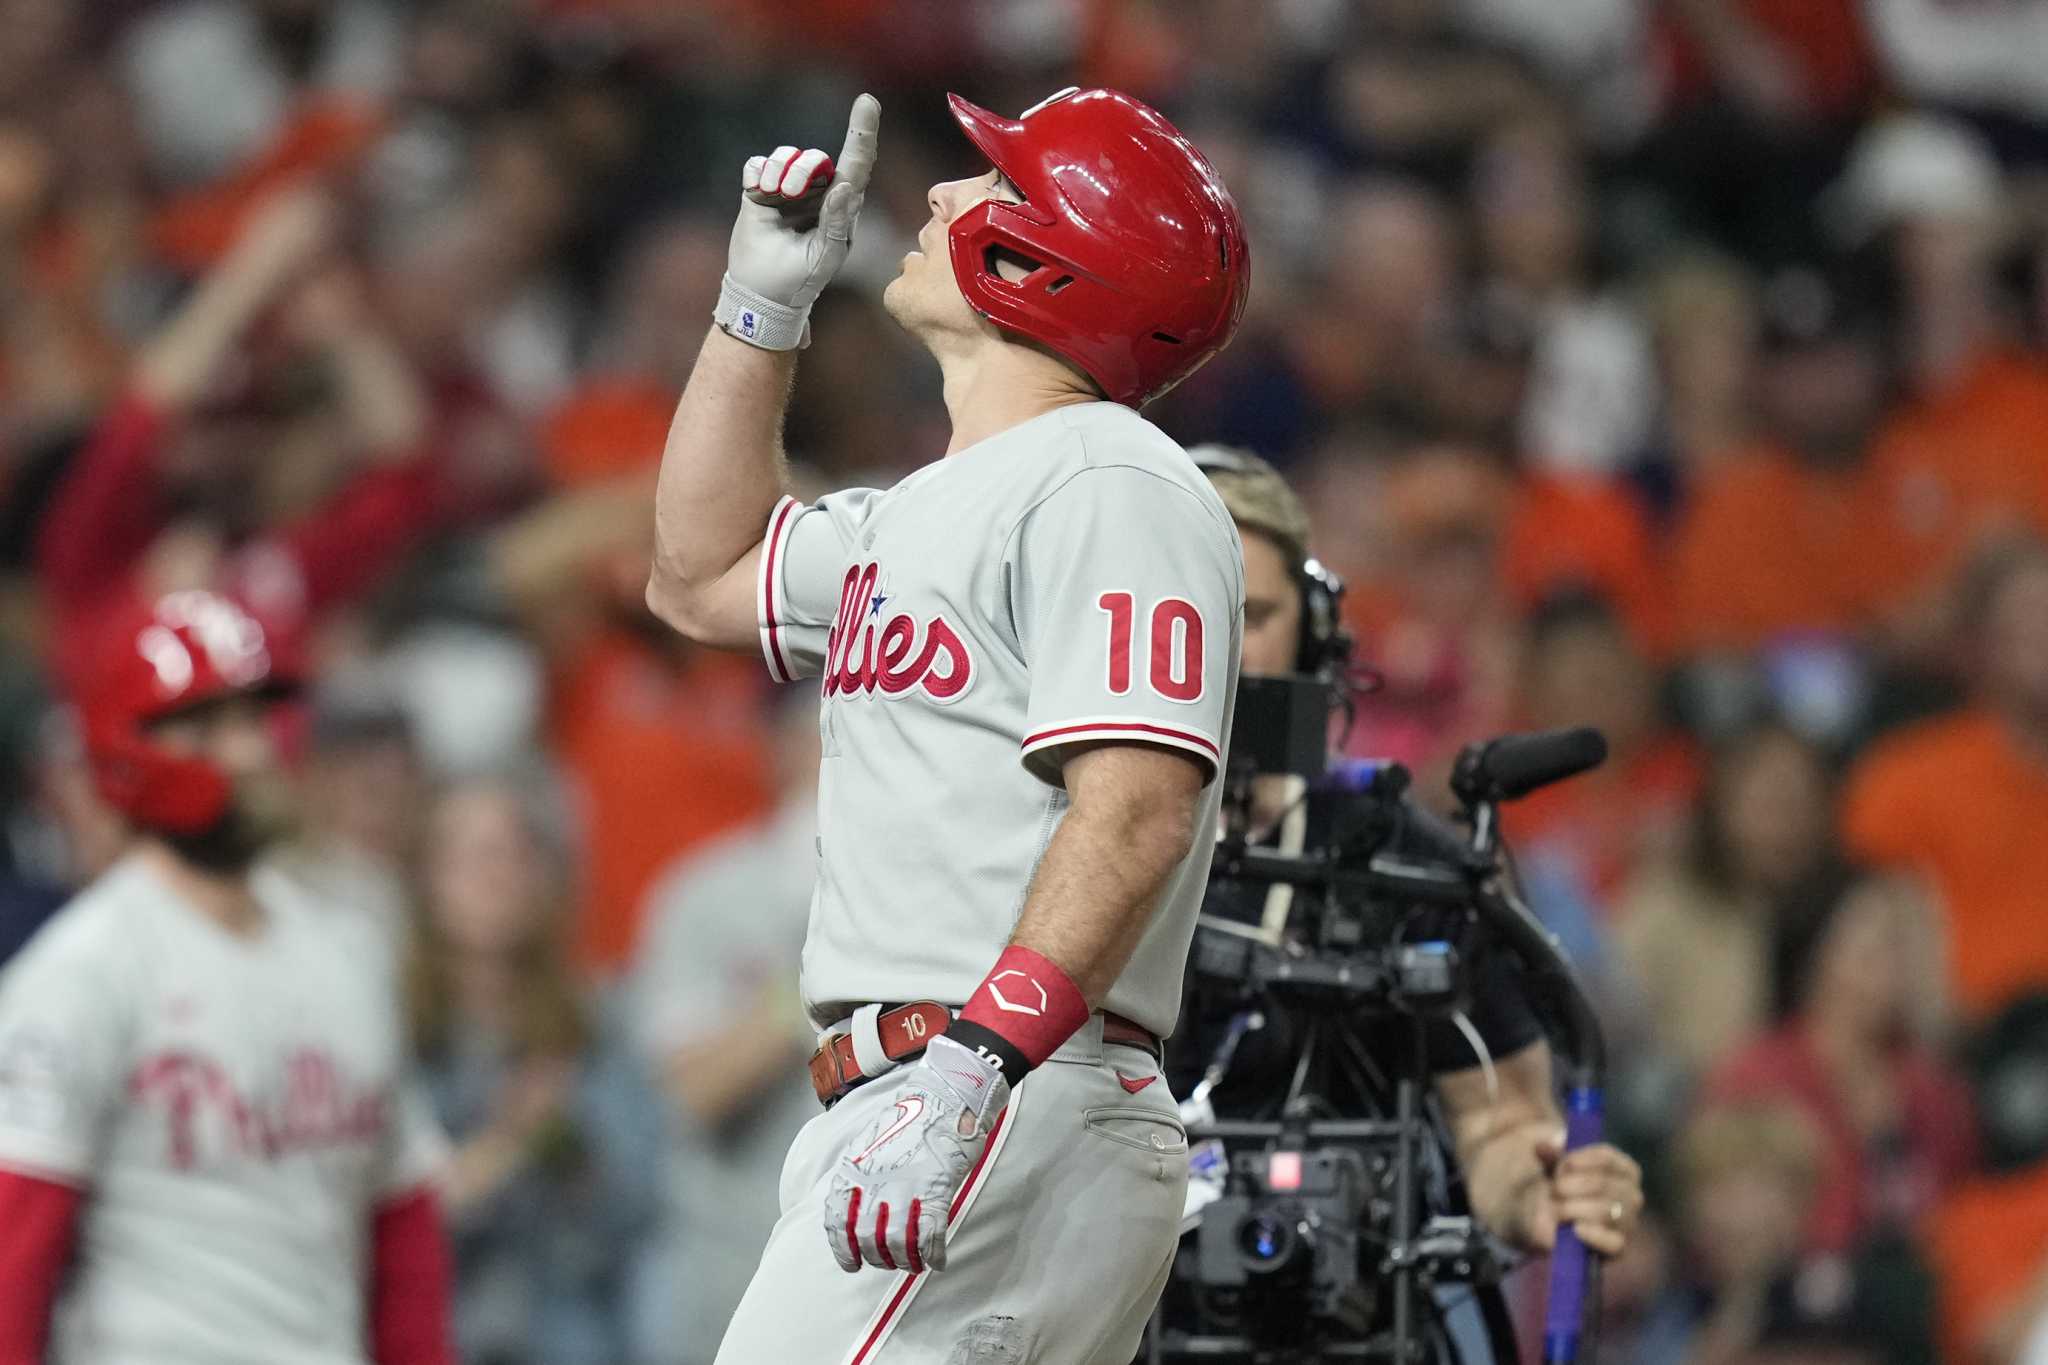 World Series: J.T. Realmuto delivers game-winner for Phillies